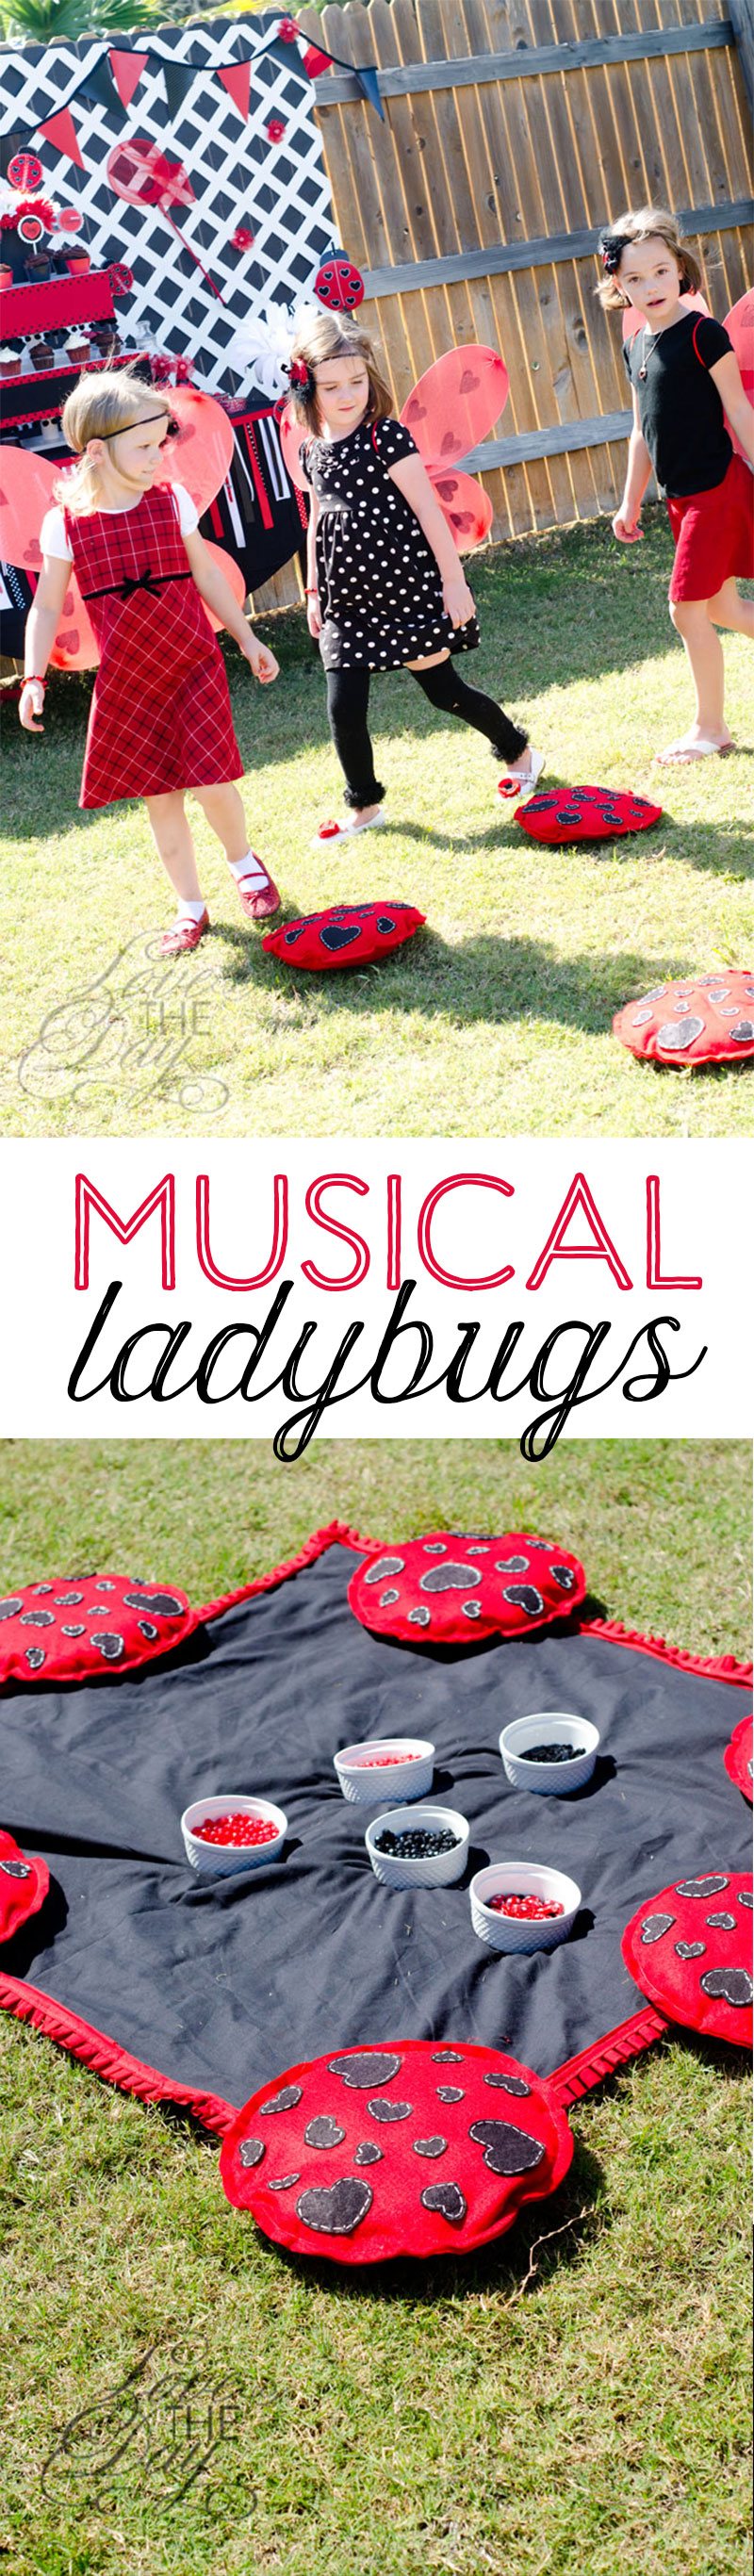 Ladybug Party Games by Lindi Haws of Love The Day